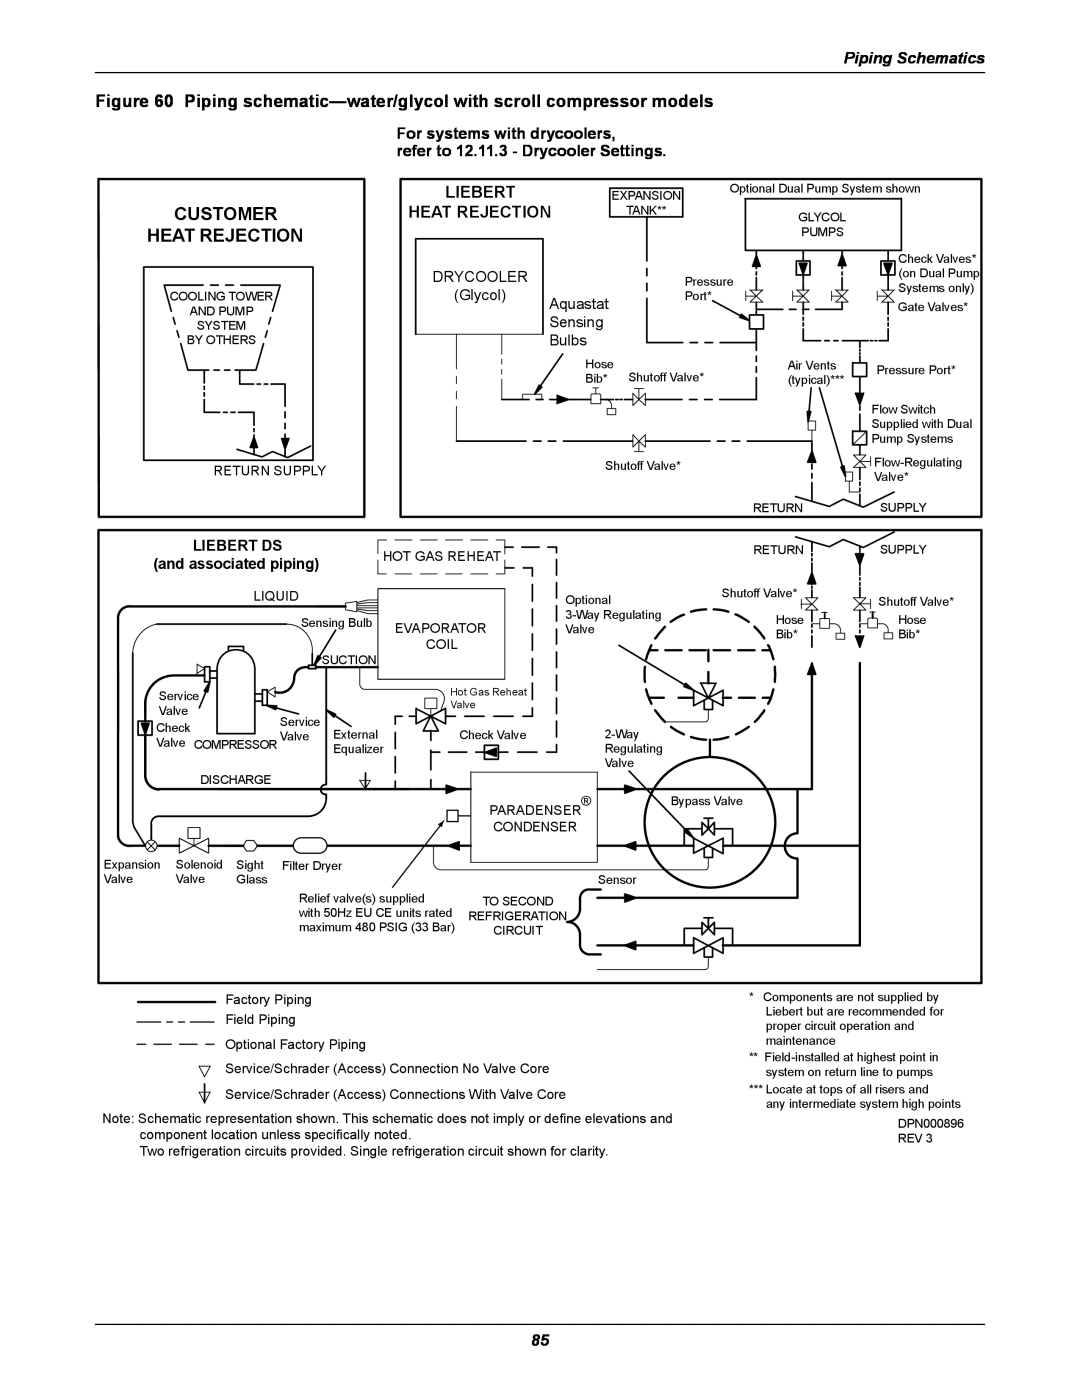 Liebert DS user manual Piping schematic-water/glycol with scroll compressor models, Liebert, Customer, Heat Rejection 